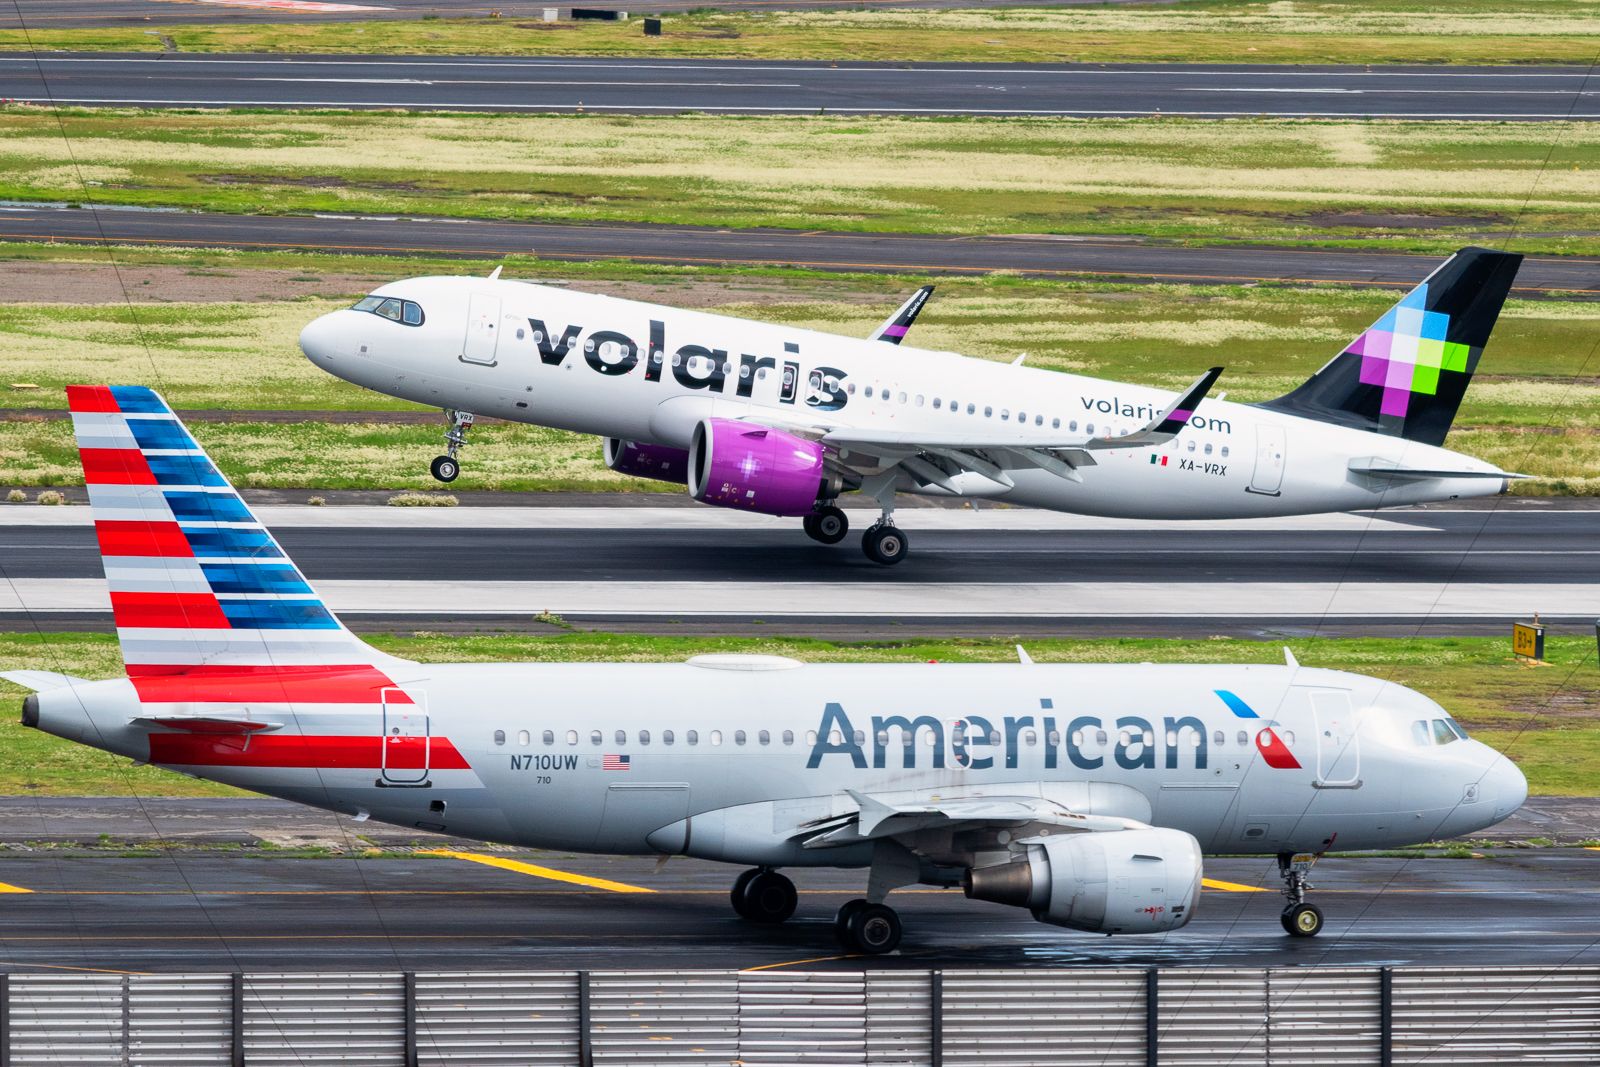 An American Airlines and a Volaris aircraft in Mexico City